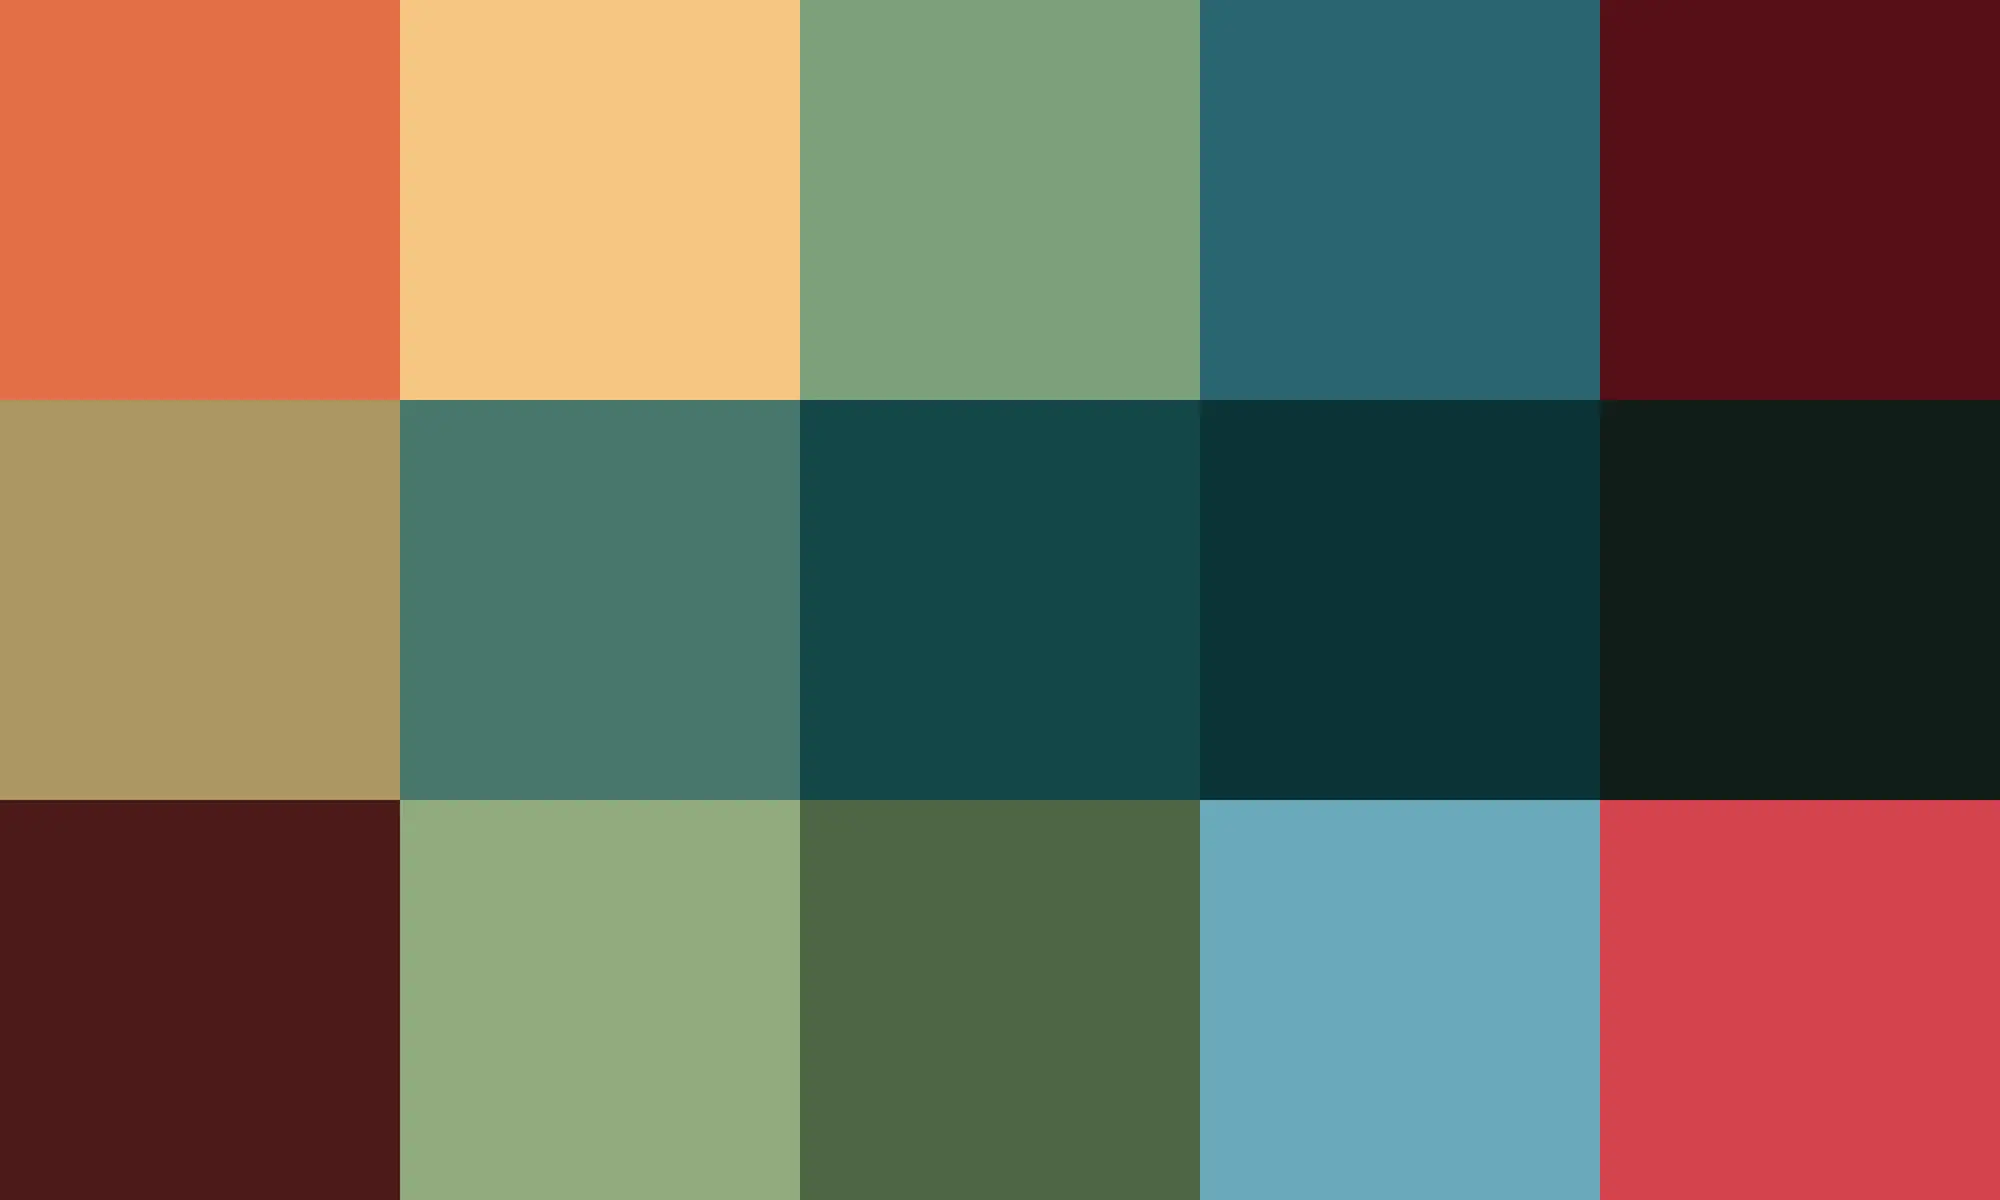 Fifteen color swatches presented in a grid three square tall and five squares wide.